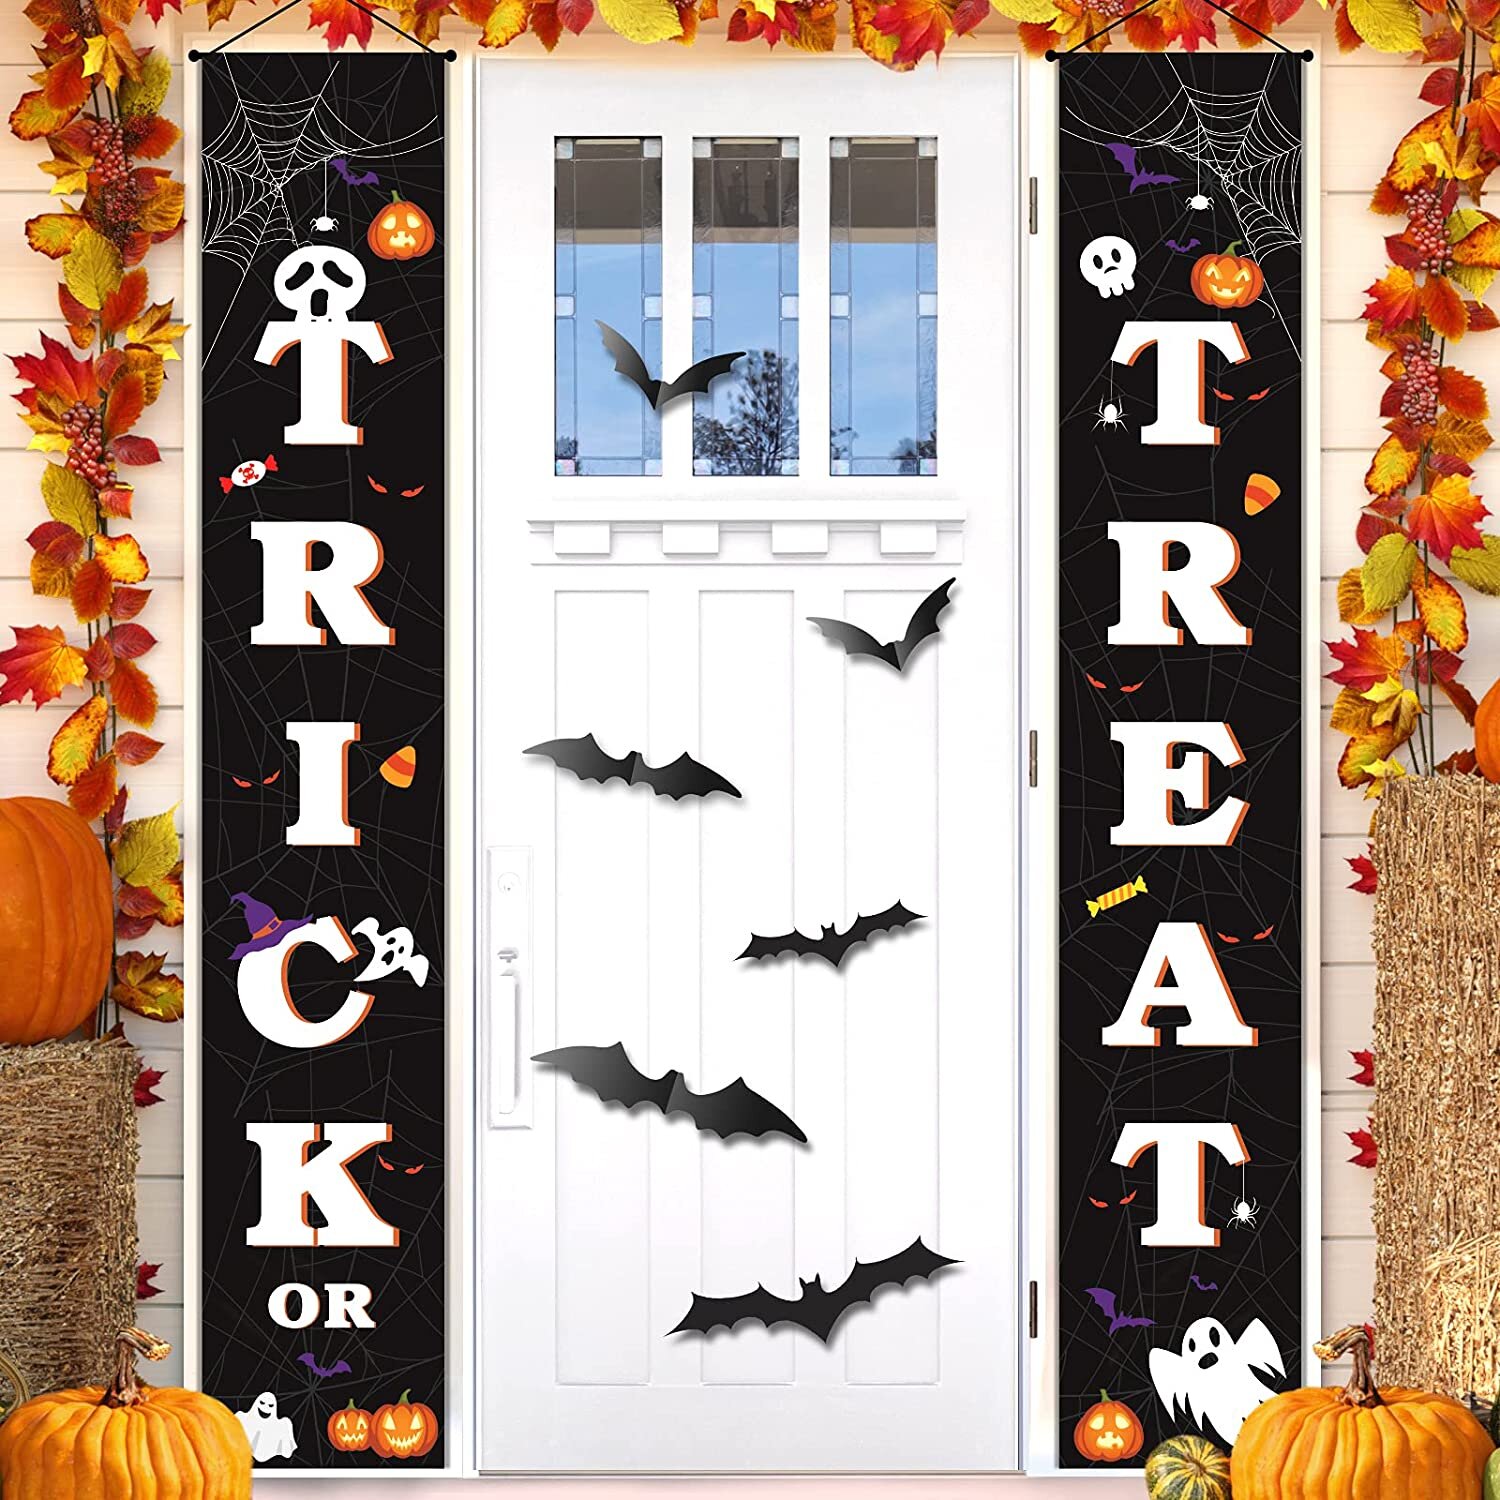 Halloween Decoration Outdoor,Scary Halloween Doorbell Decor,Halloween Door Decor with Spooky Sounds,Halloween Party Decoration,Trick or Treat Event for Kids